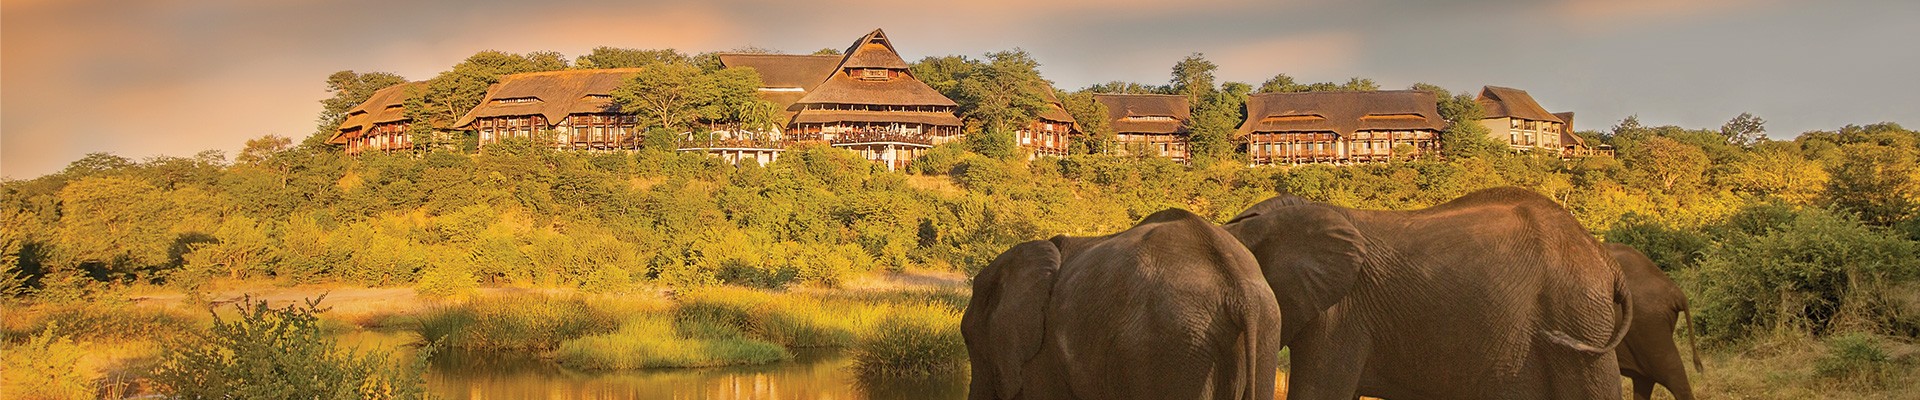 4* Victoria Falls Safari Lodge - All Bells and Whistles Package (3 Nights)